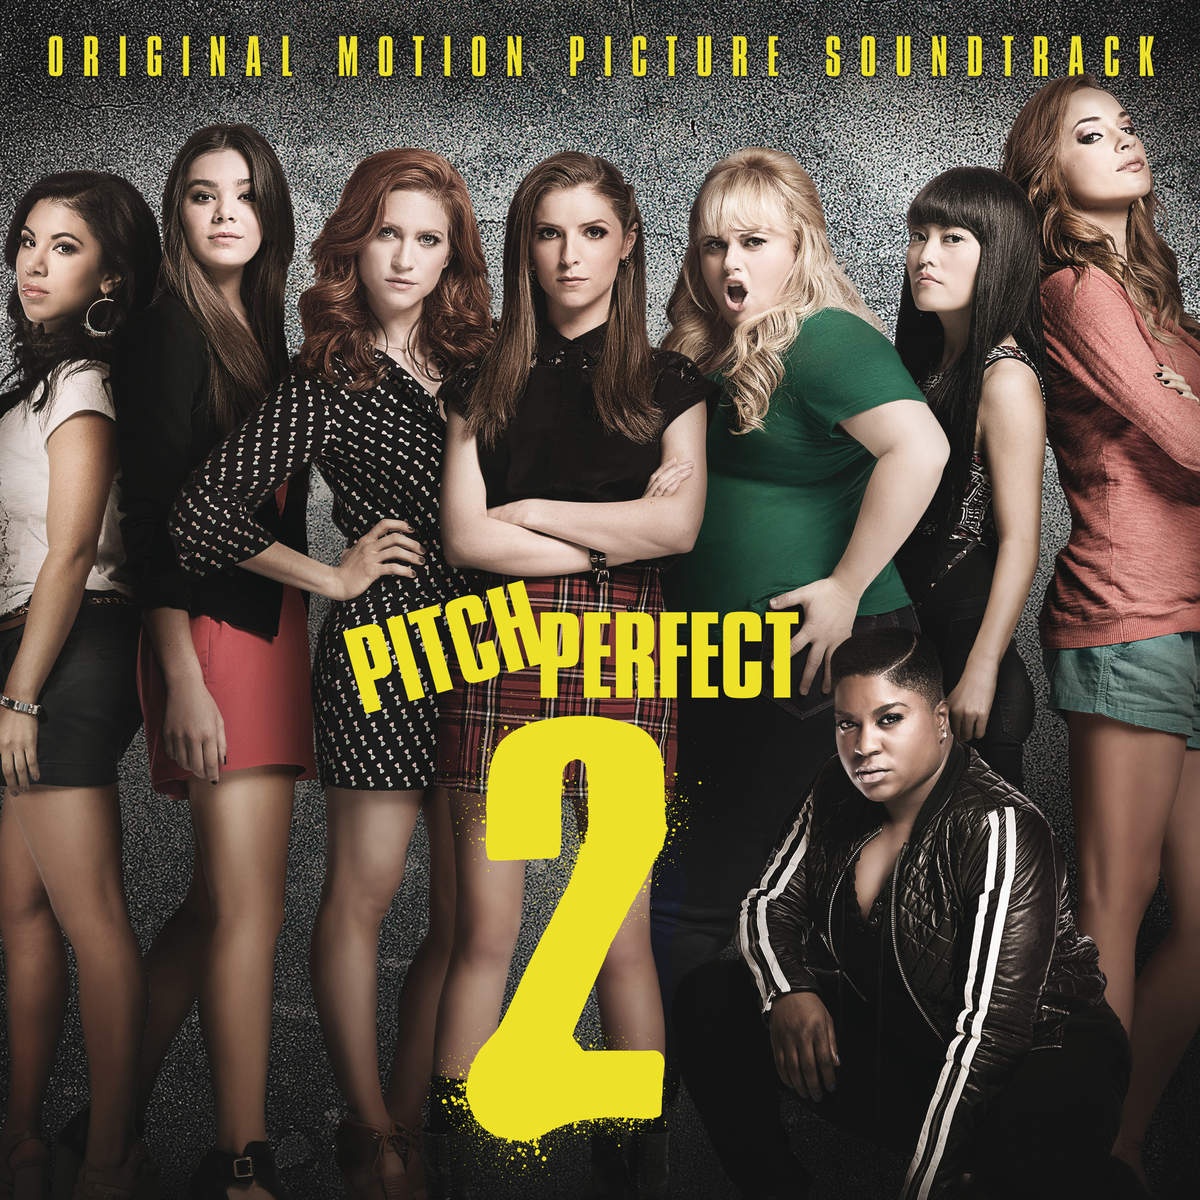 Riff Off - From "Pitch Perfect 2" Soundtrack